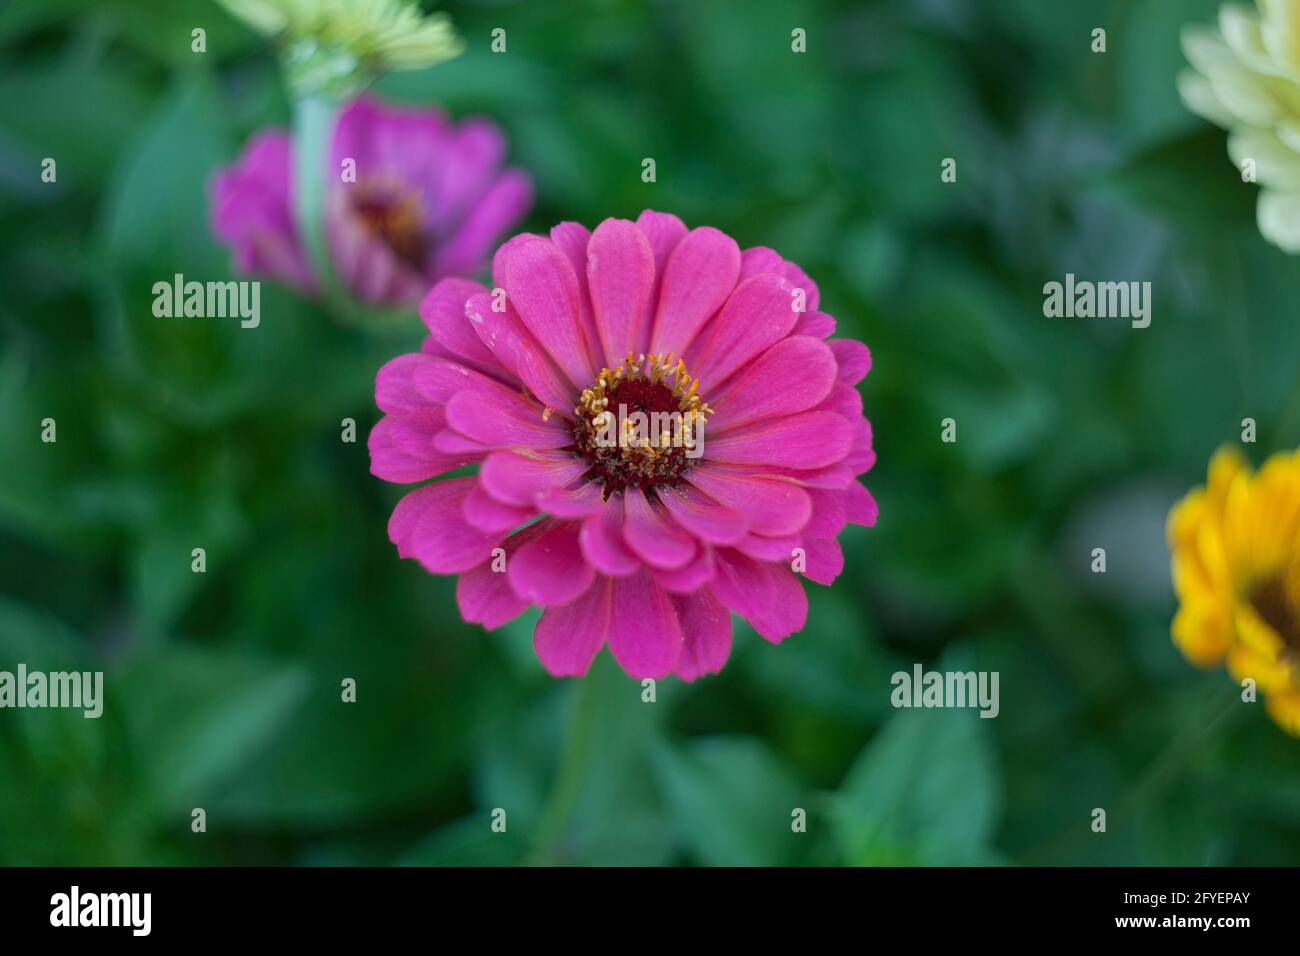 Pink zinnia flower with open petals located in a garden over green leaves Stock Photo